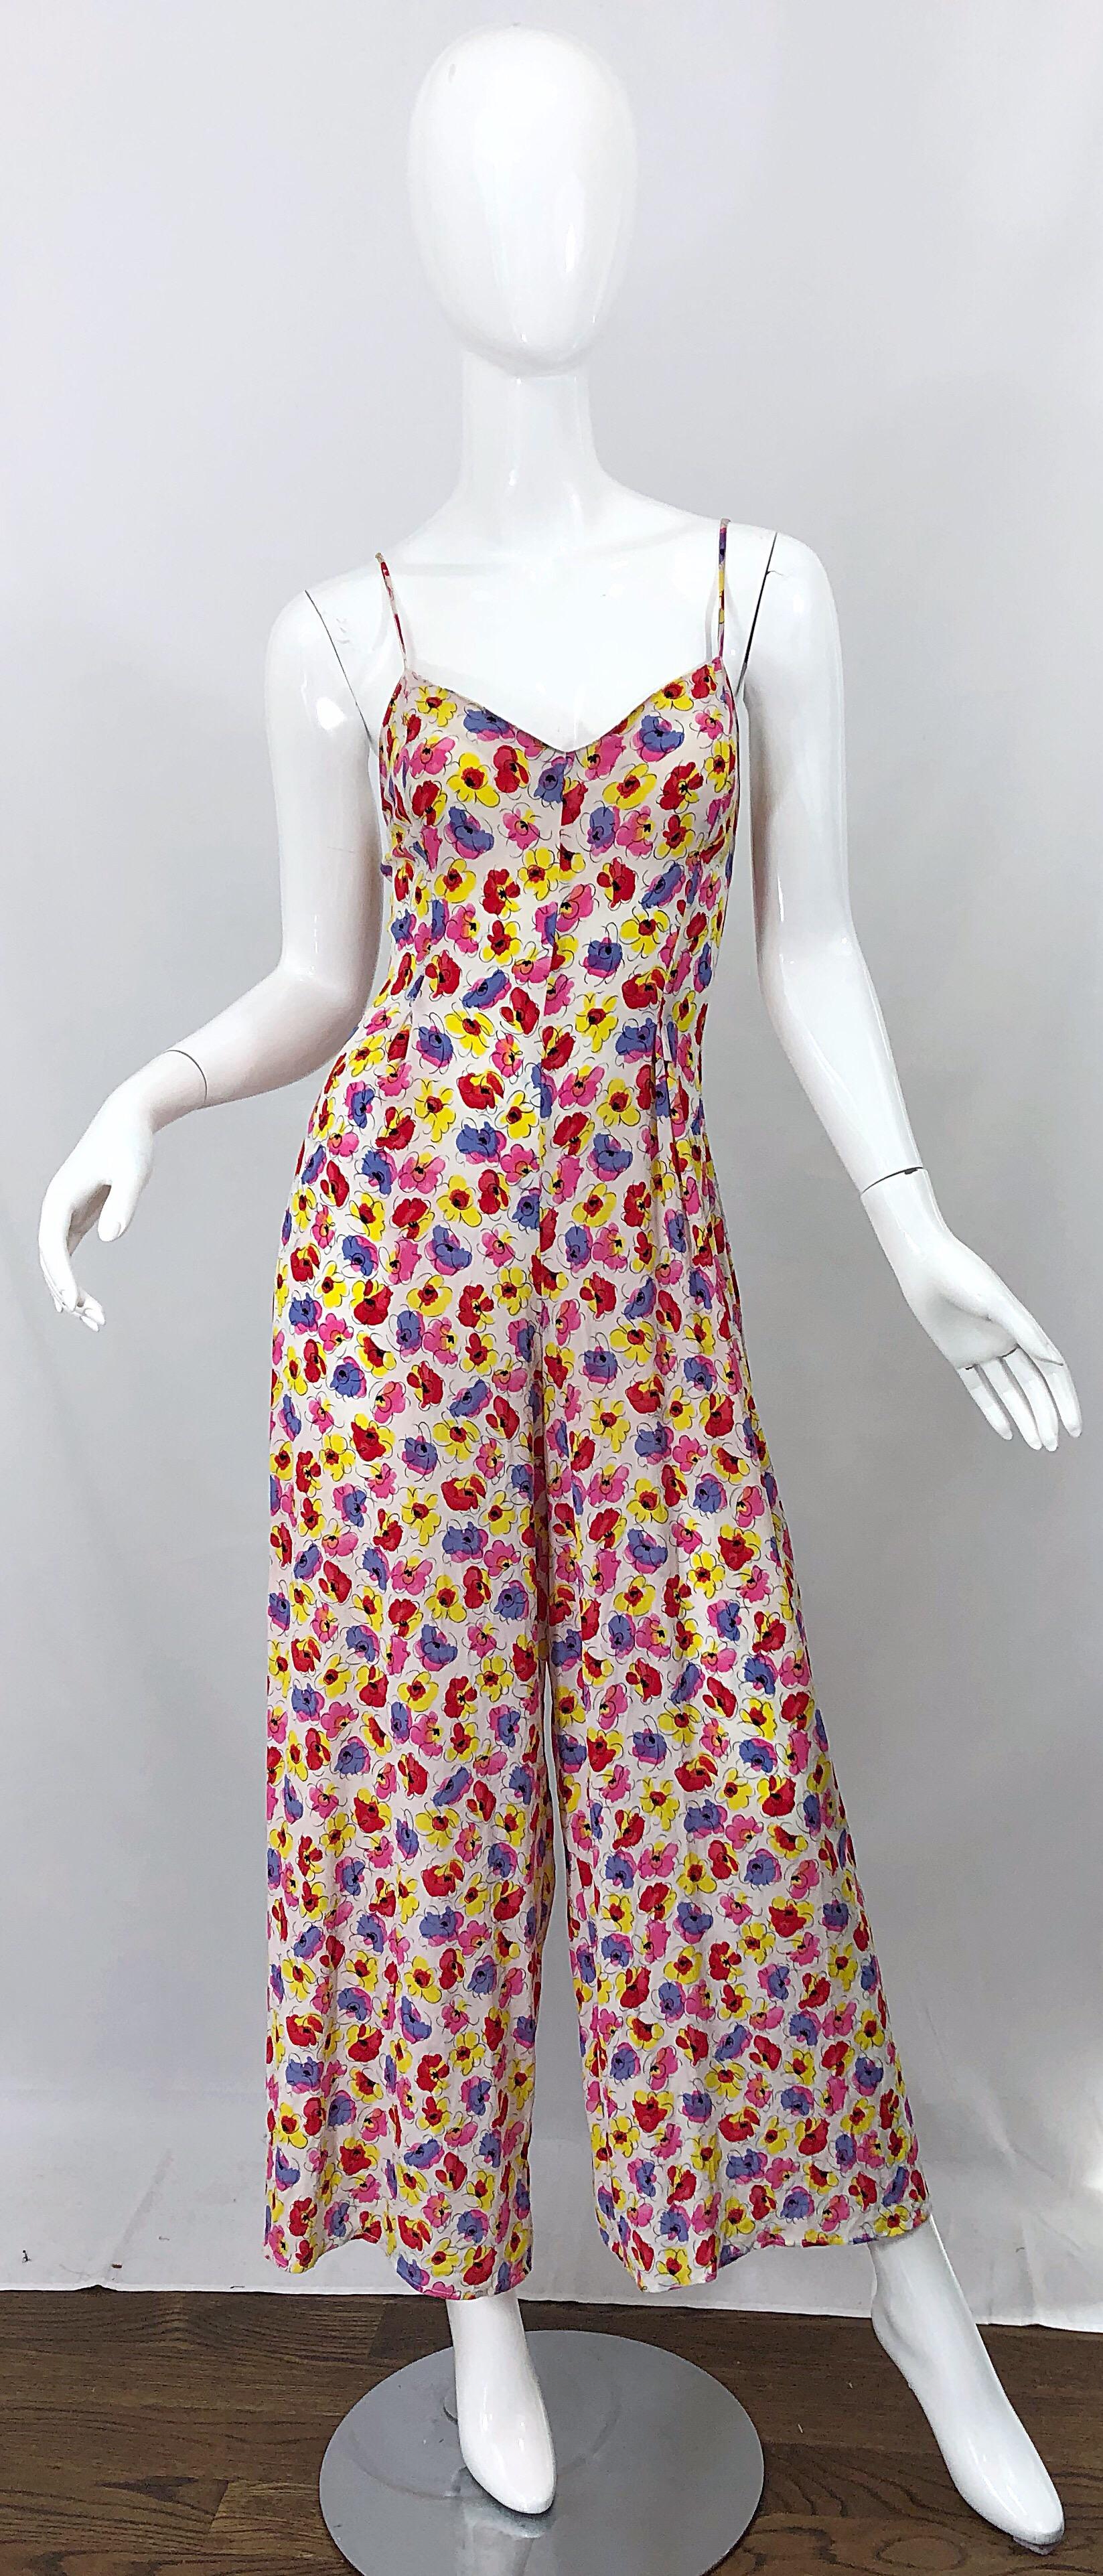 Chic 1990s French designer wide leg rayon jumpsuit! Features flowers in vibrant colors of pink, purple, red, yellow and white. Fitted spaghetti strap bodice with flattering wide legs. Hidden zipper up the back. Great belted or alone for any day or